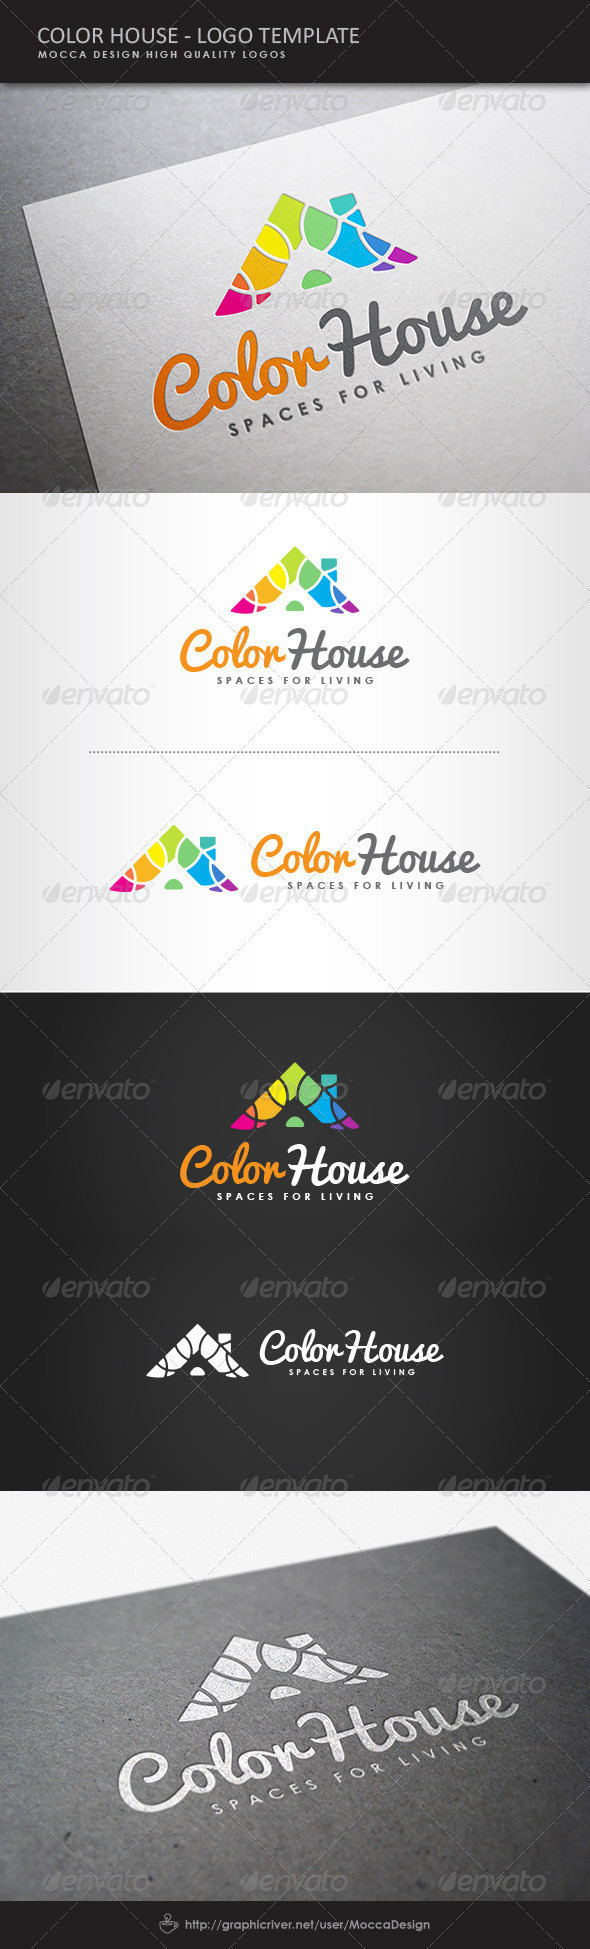 Preview color house